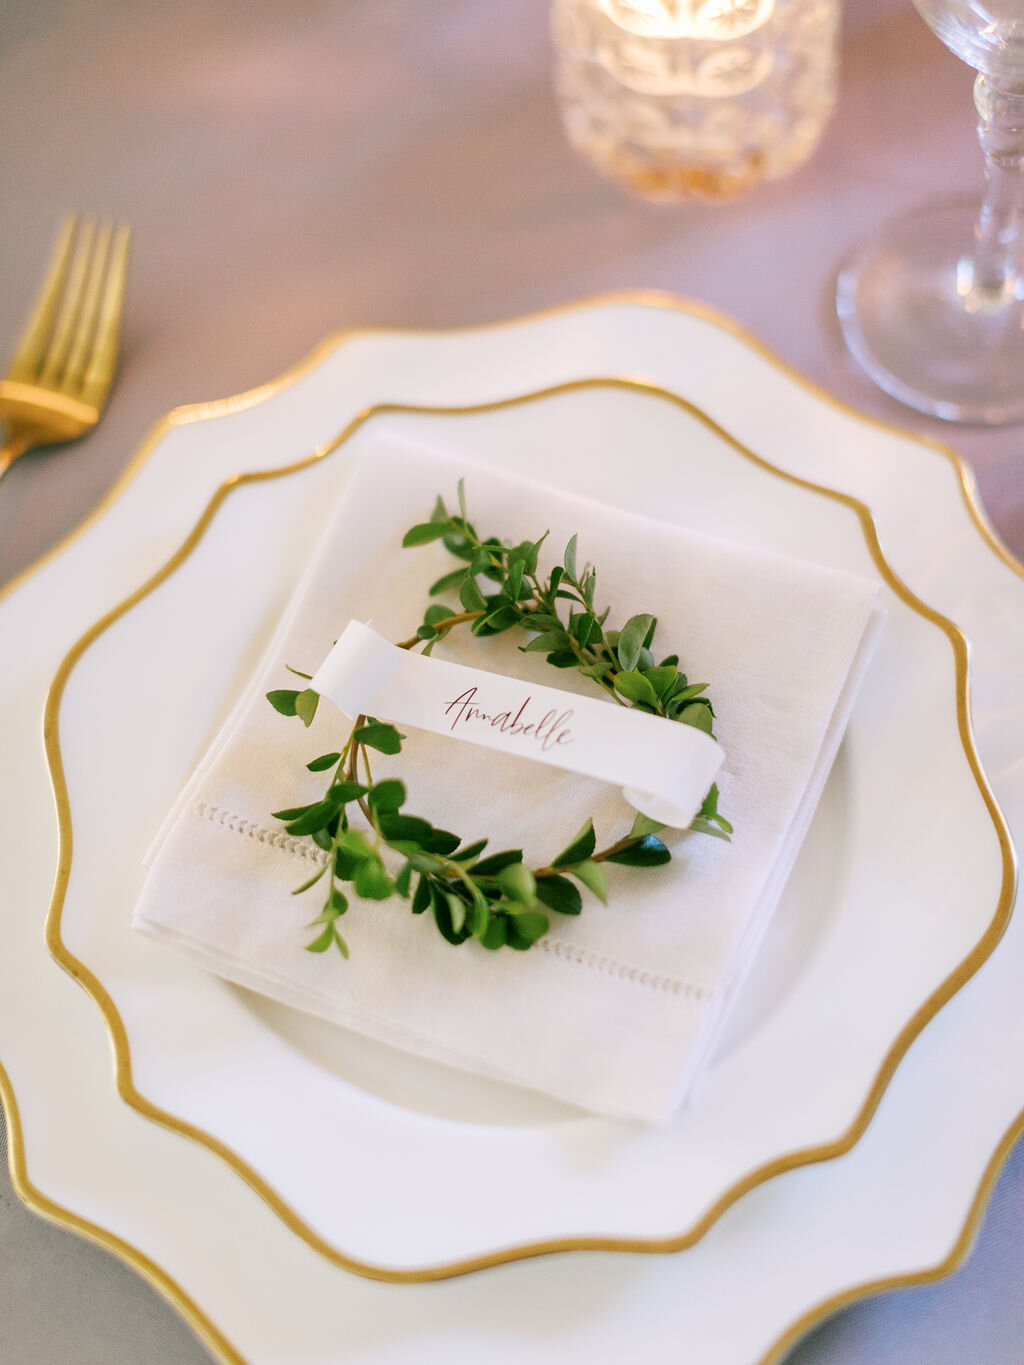 SIMPLE PLACE SETTINGS